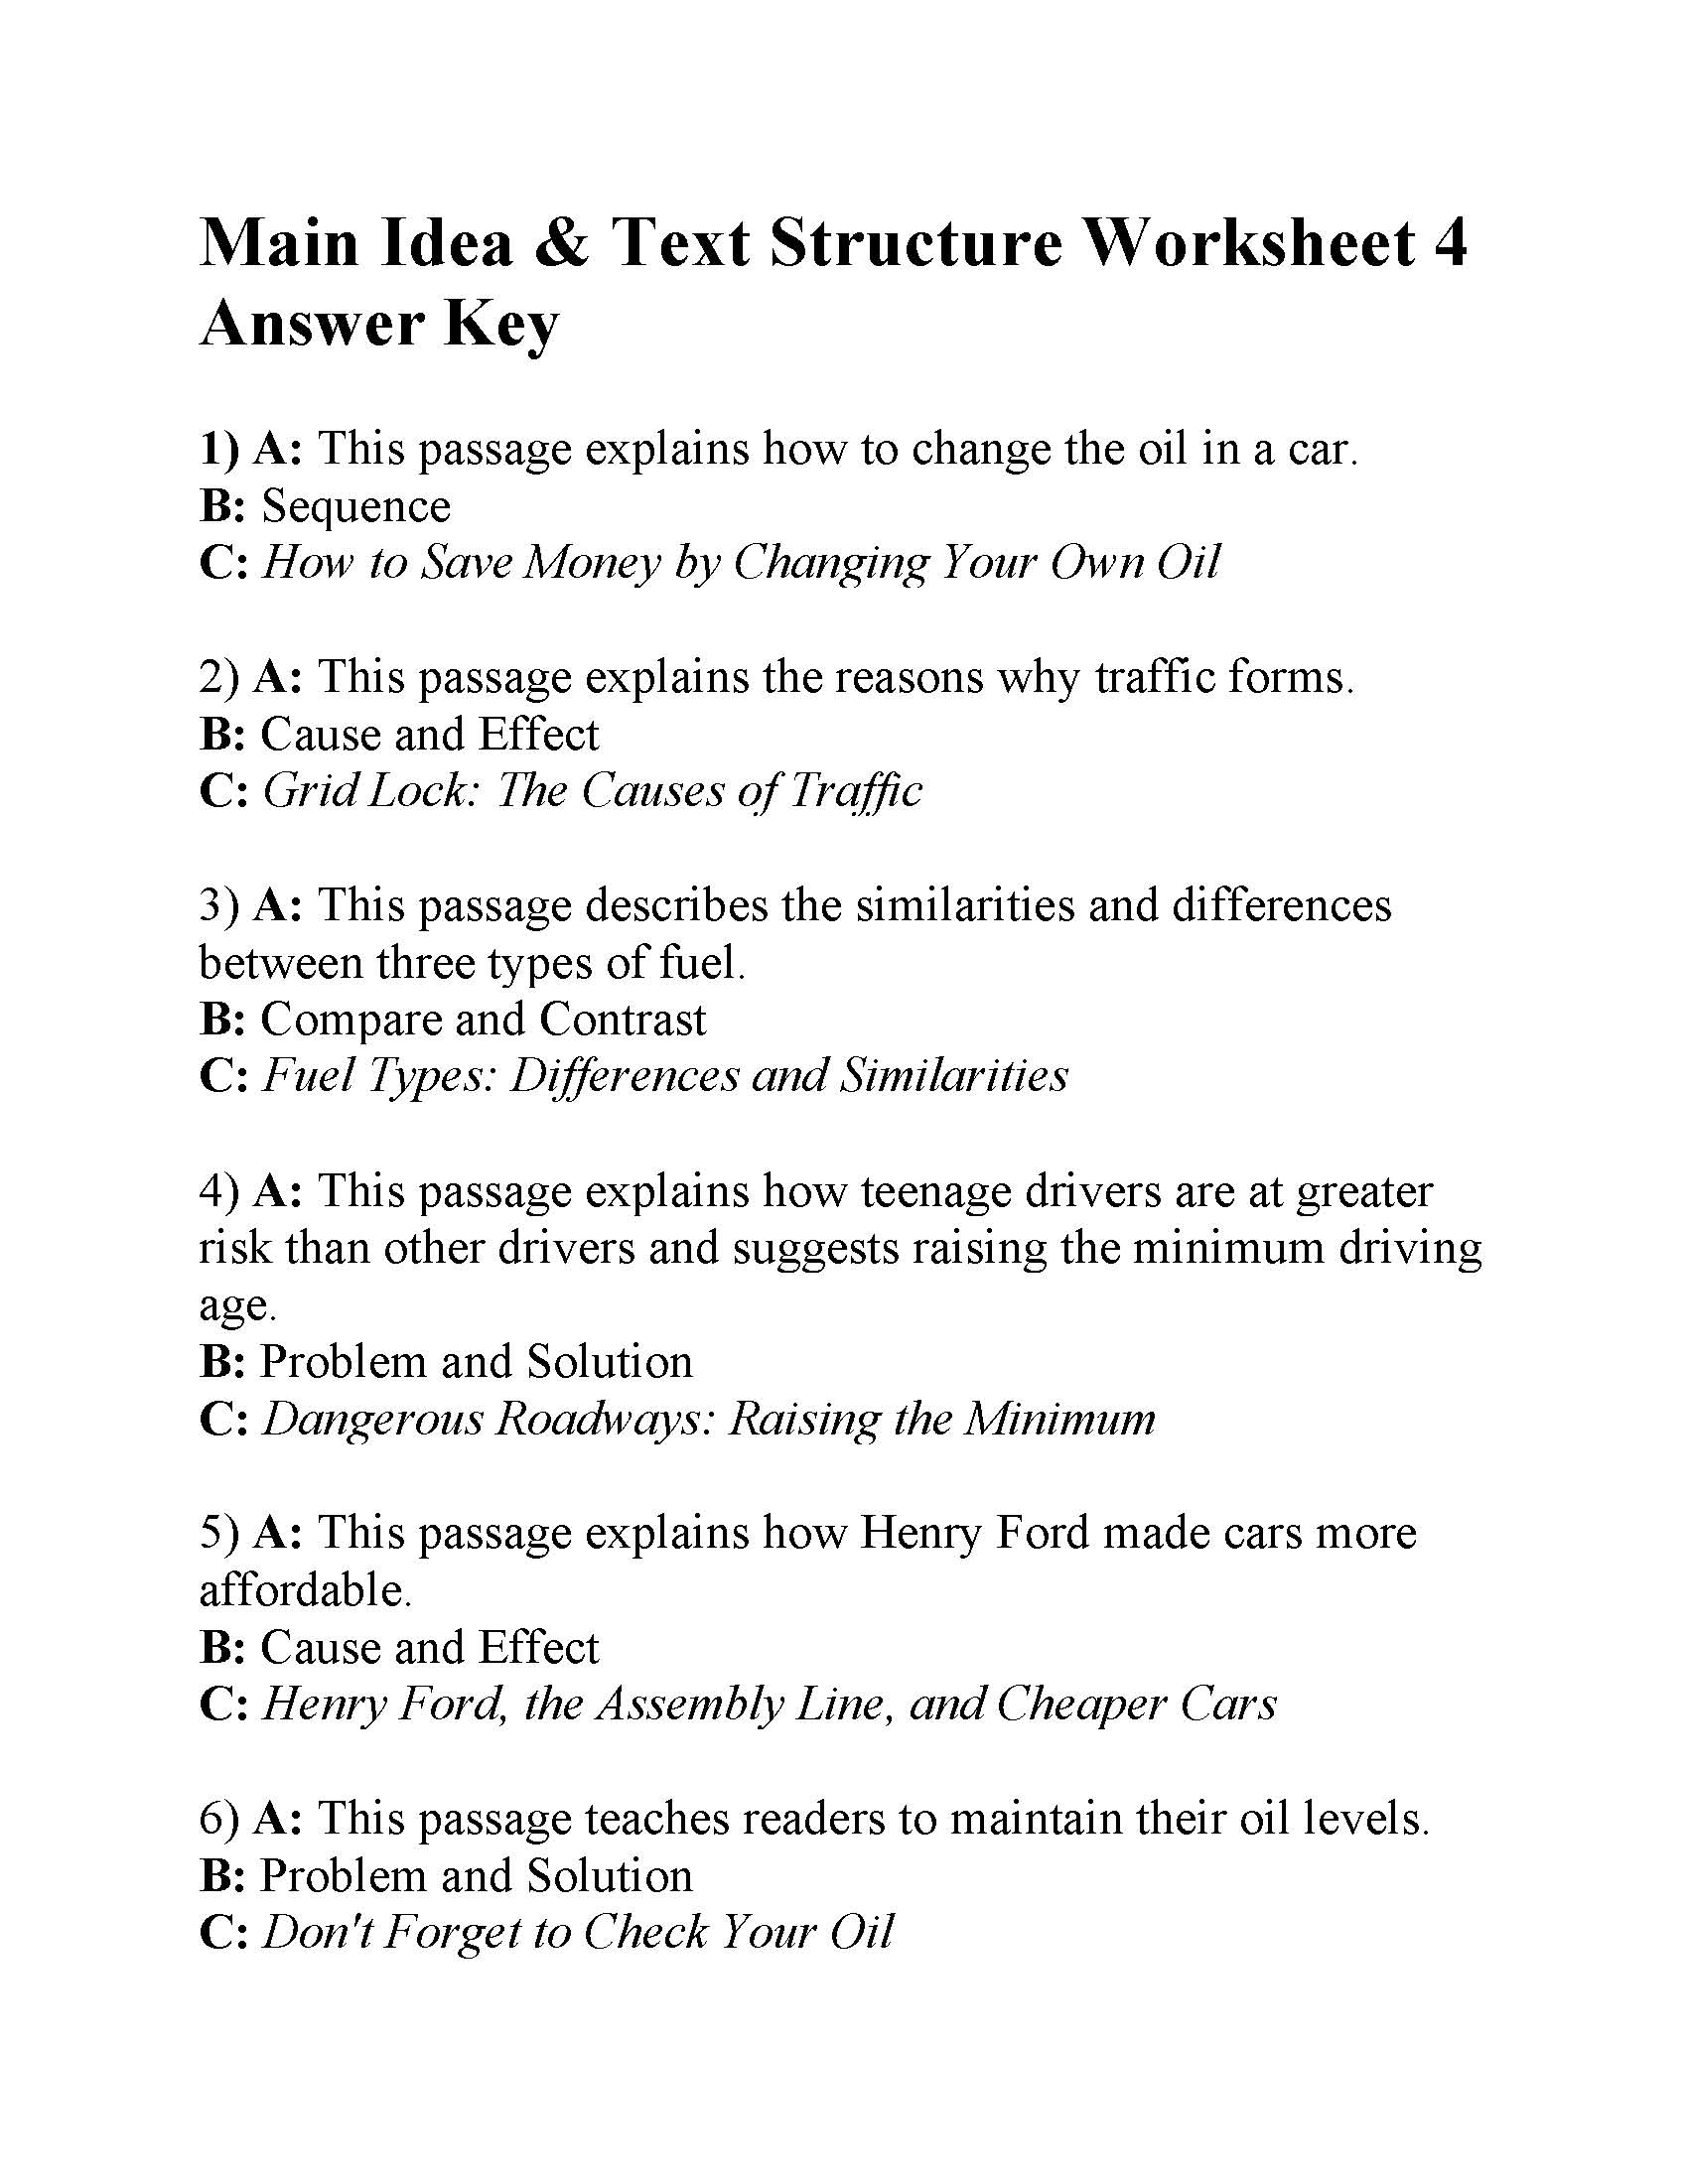 Main Idea and Text Structure Worksheet 22  Answers With Regard To Main Idea Worksheet 4